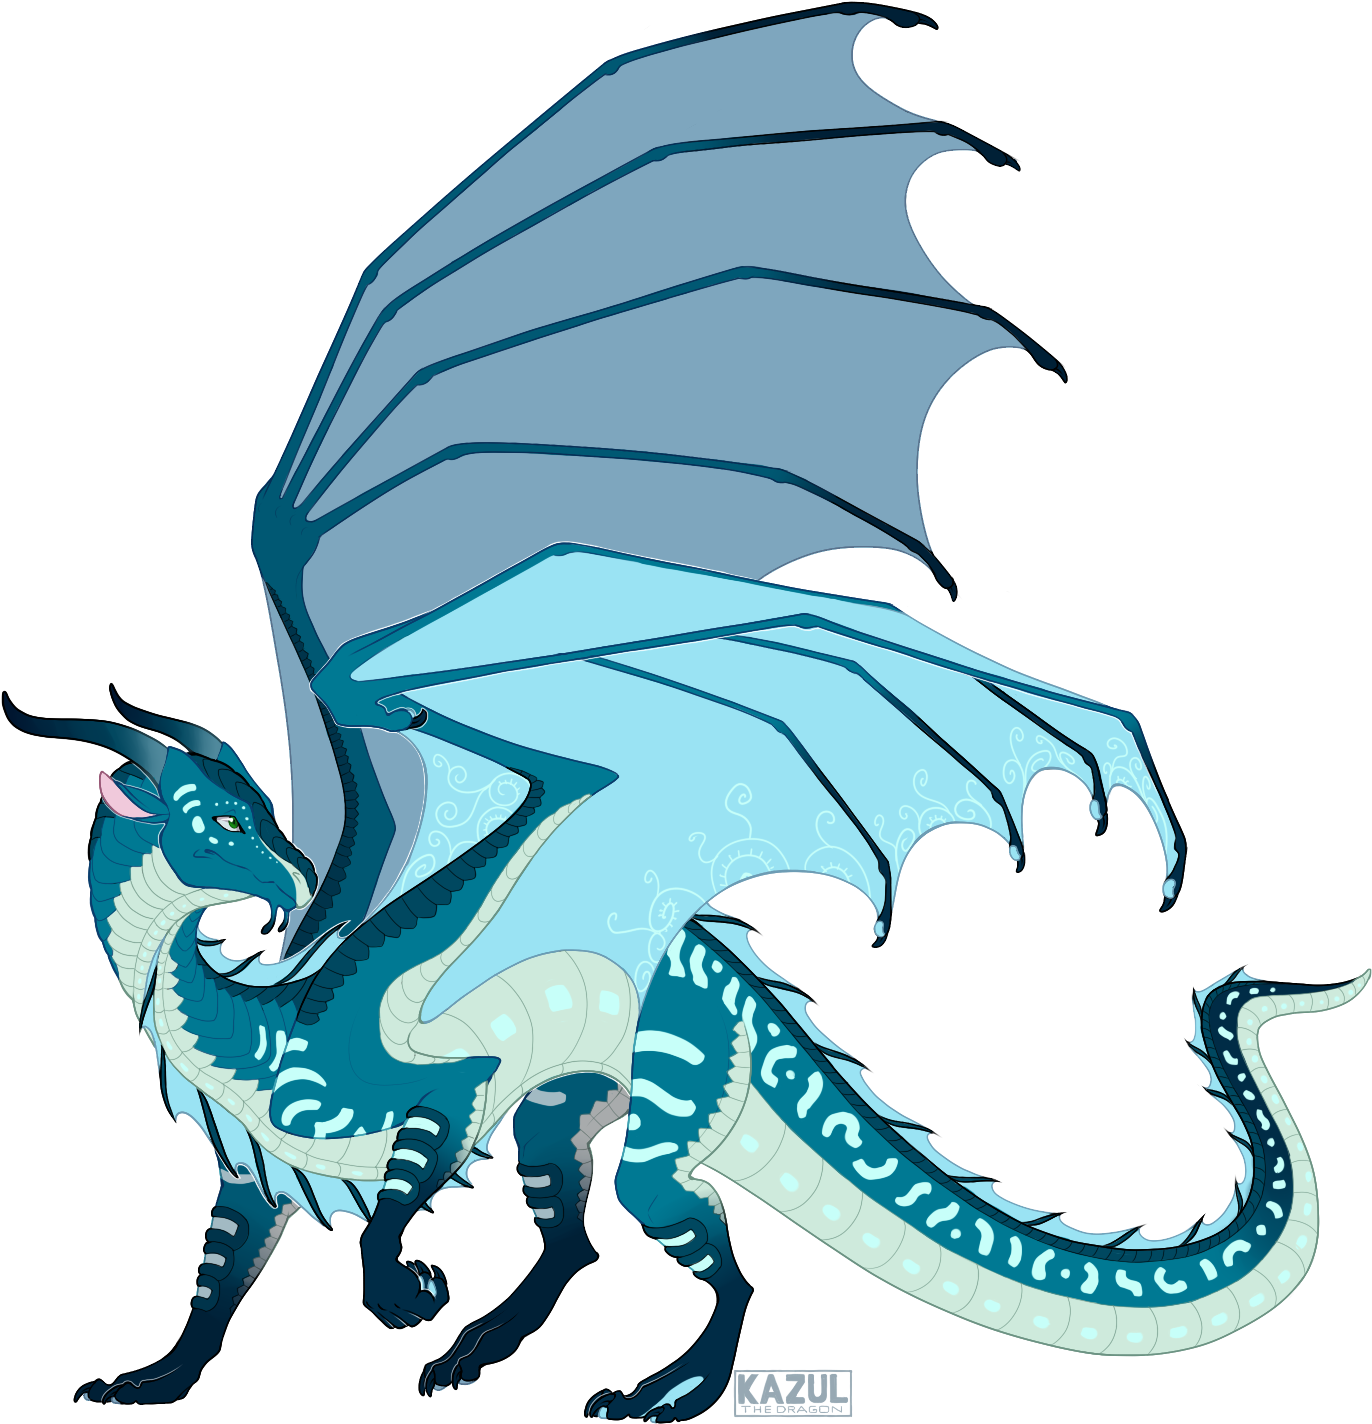 I Thought I'd Try Making Art And Posting It To Redbubble - Wings Of Fire Dragon Png (1383x1431)